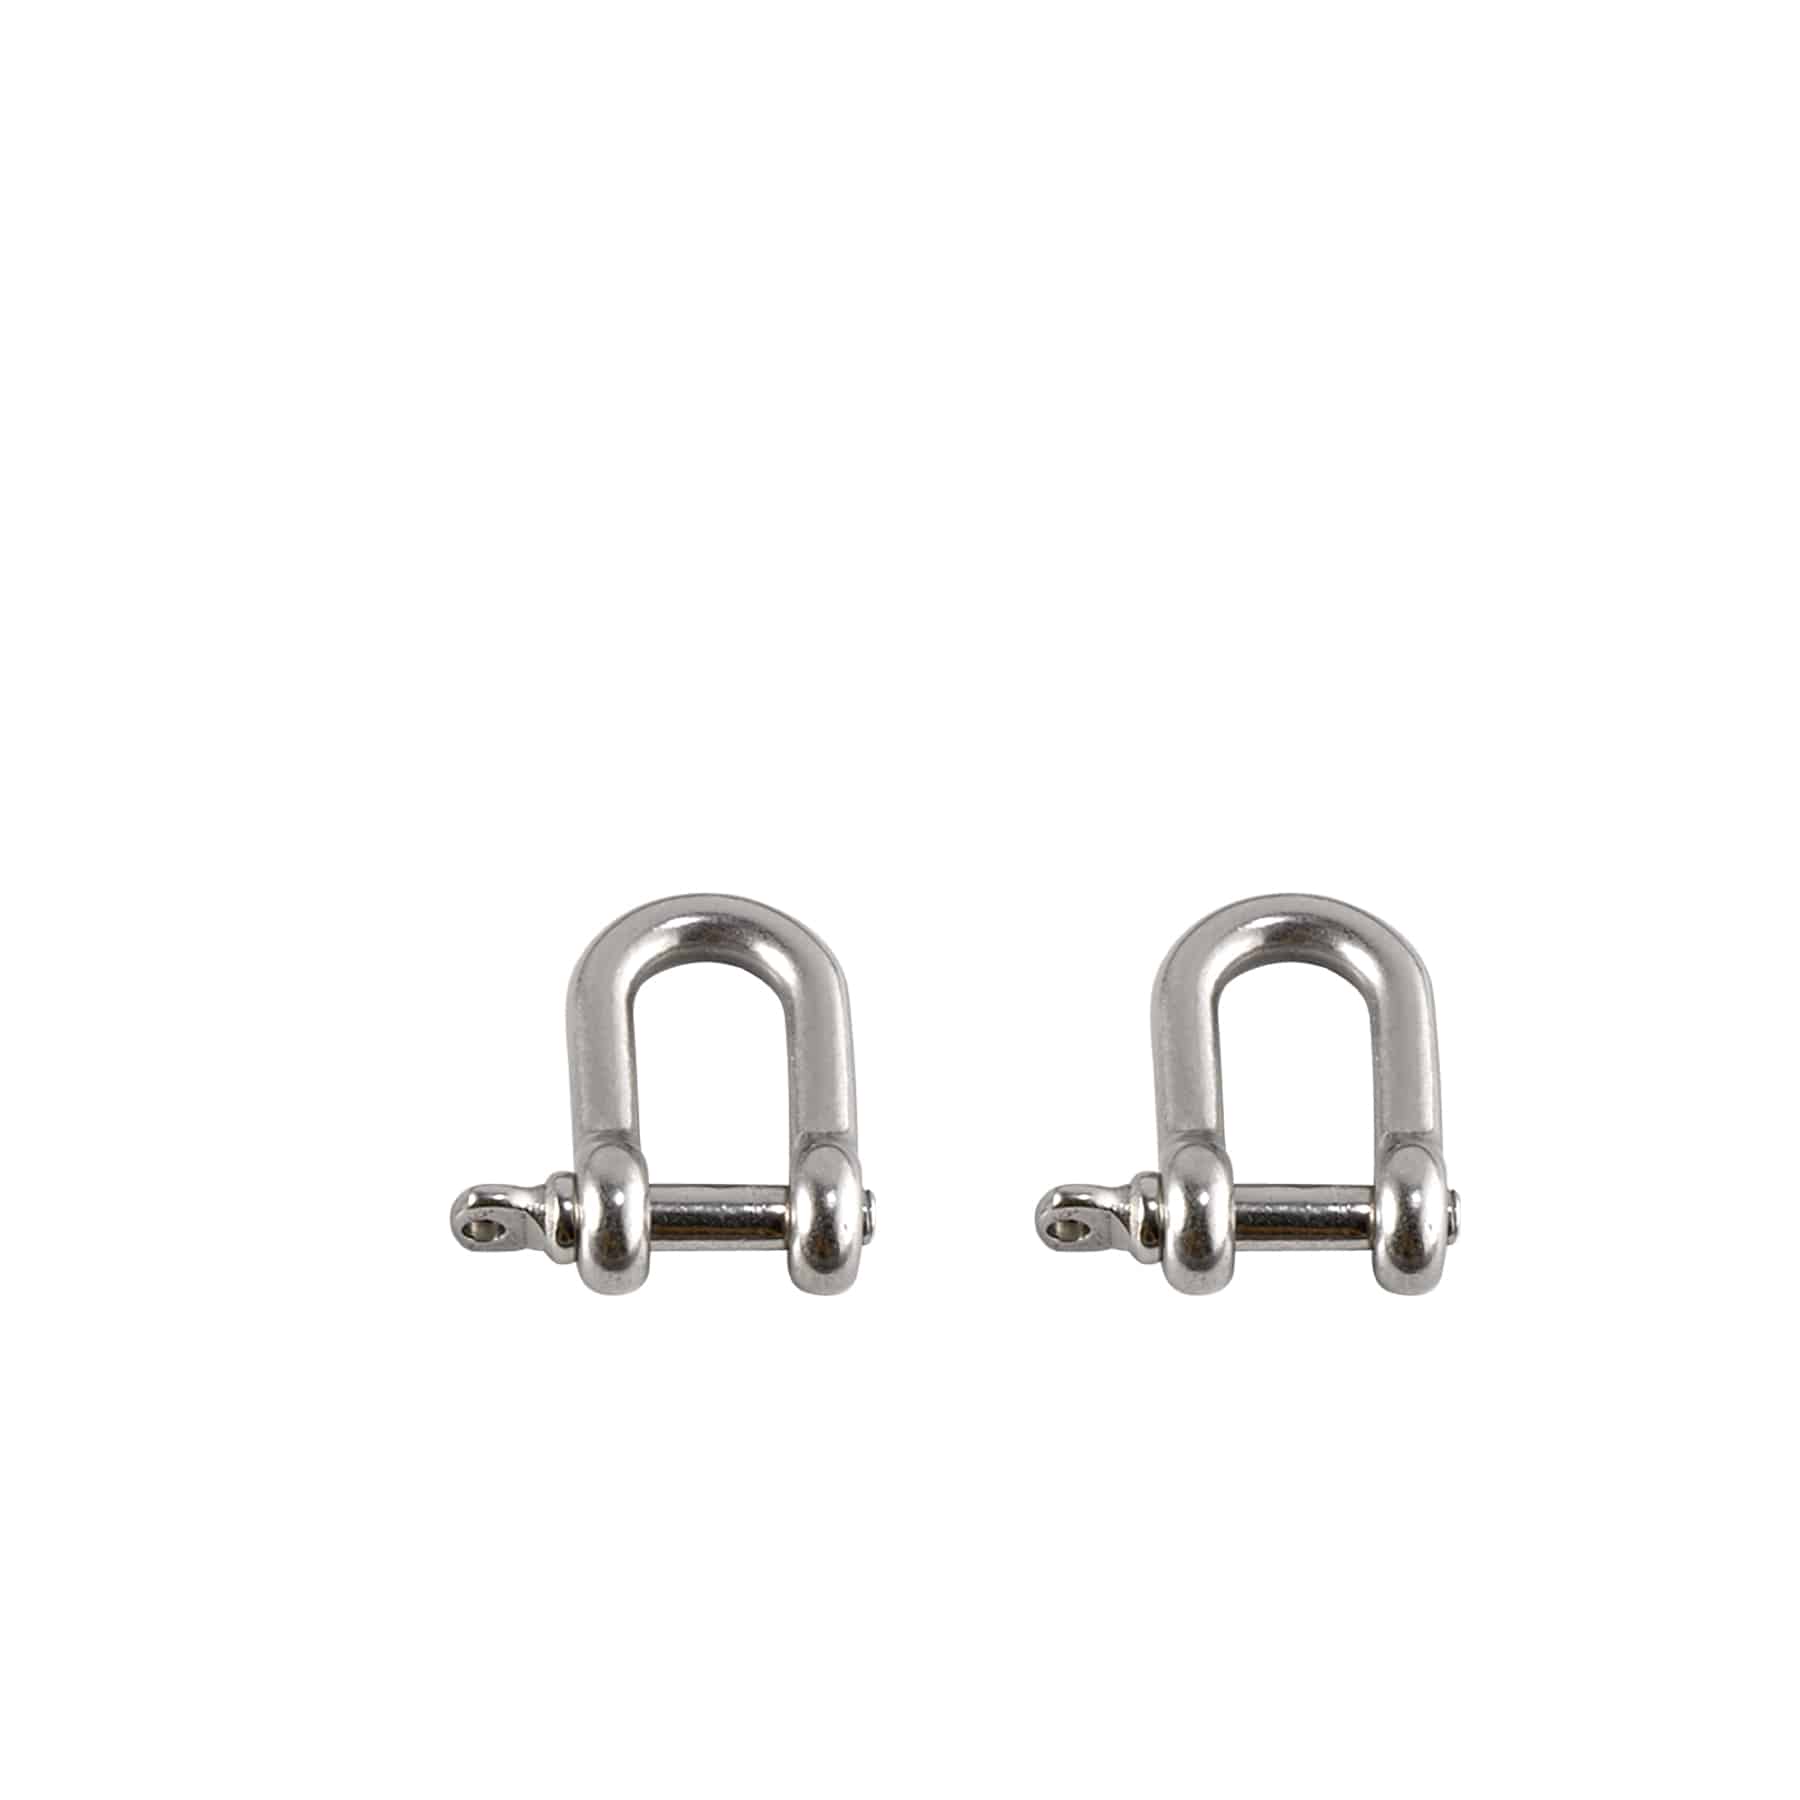 Ergodyne Squids 3790M Tool Attachment Shackle 15 Pounds 2-Pack Stainless Steel Medium 